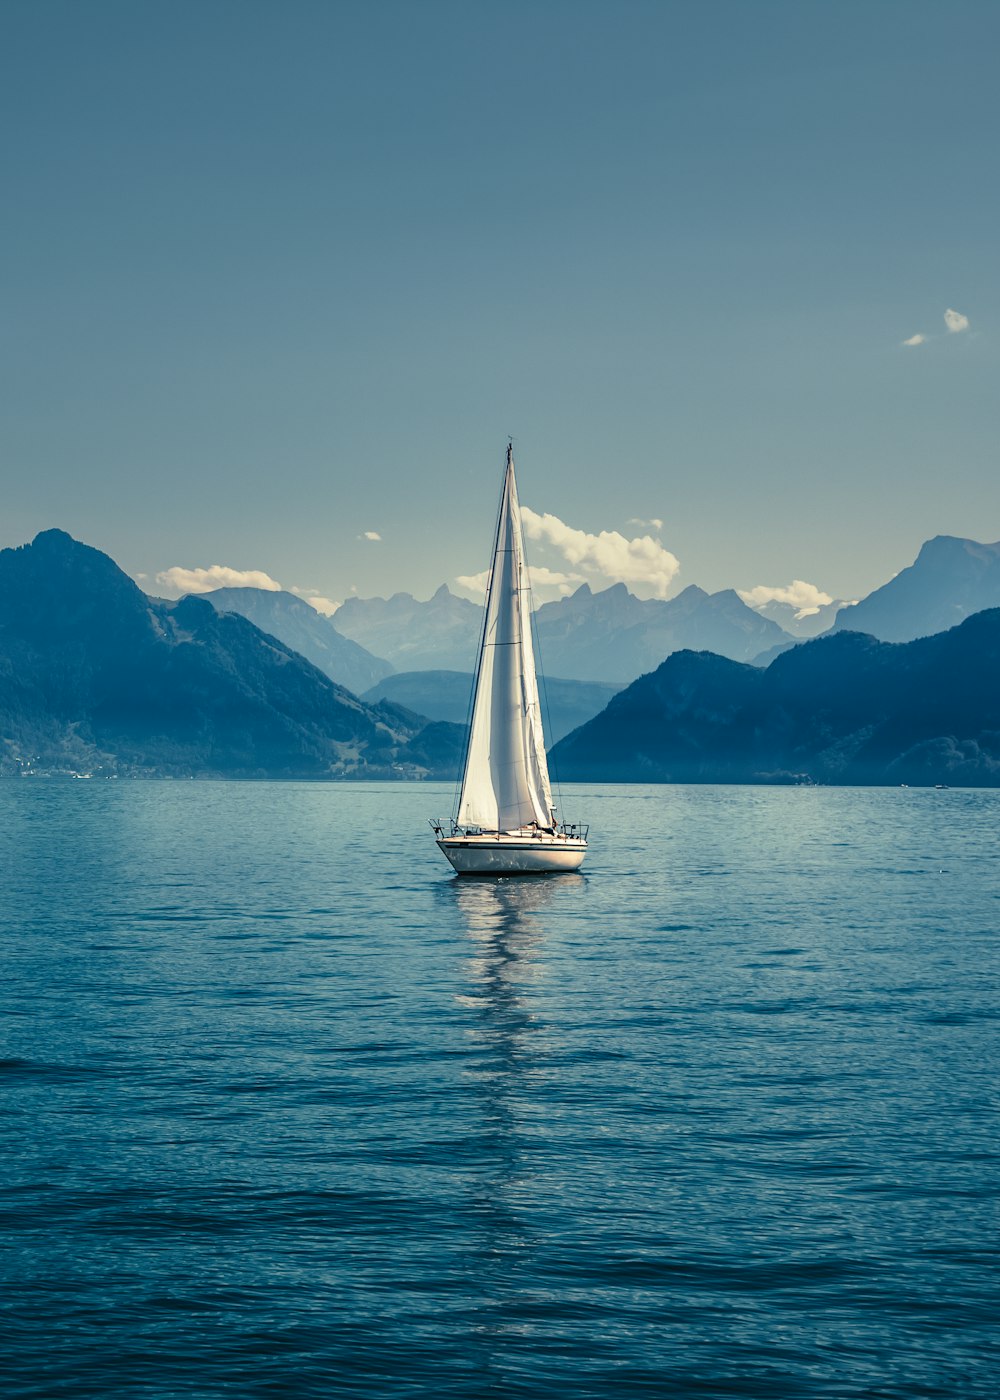 a sailboat in the middle of a lake with mountains in the background